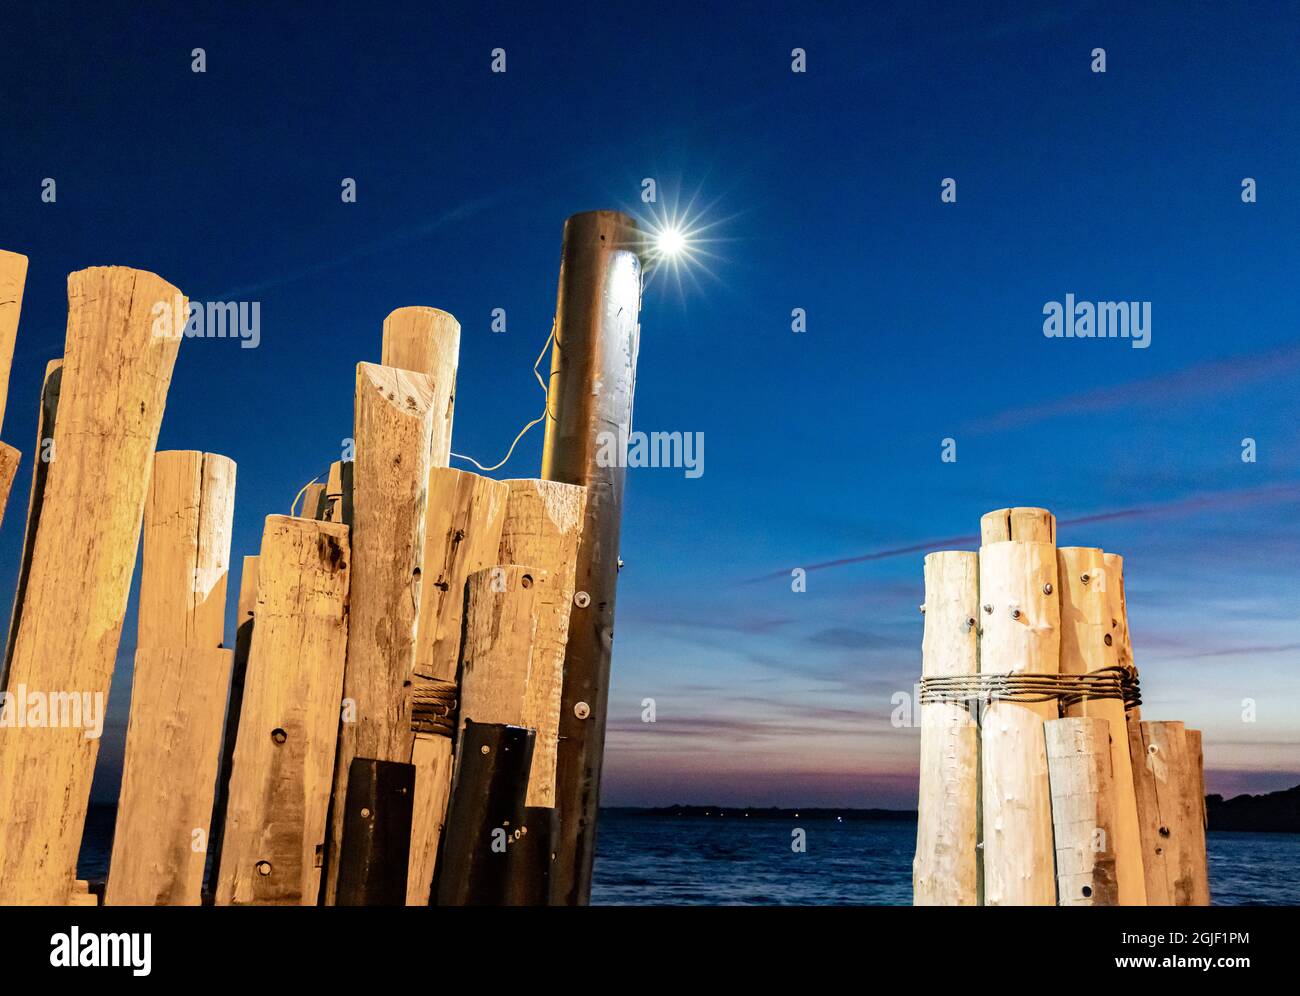 Wooden nautical pilings at night Stock Photo